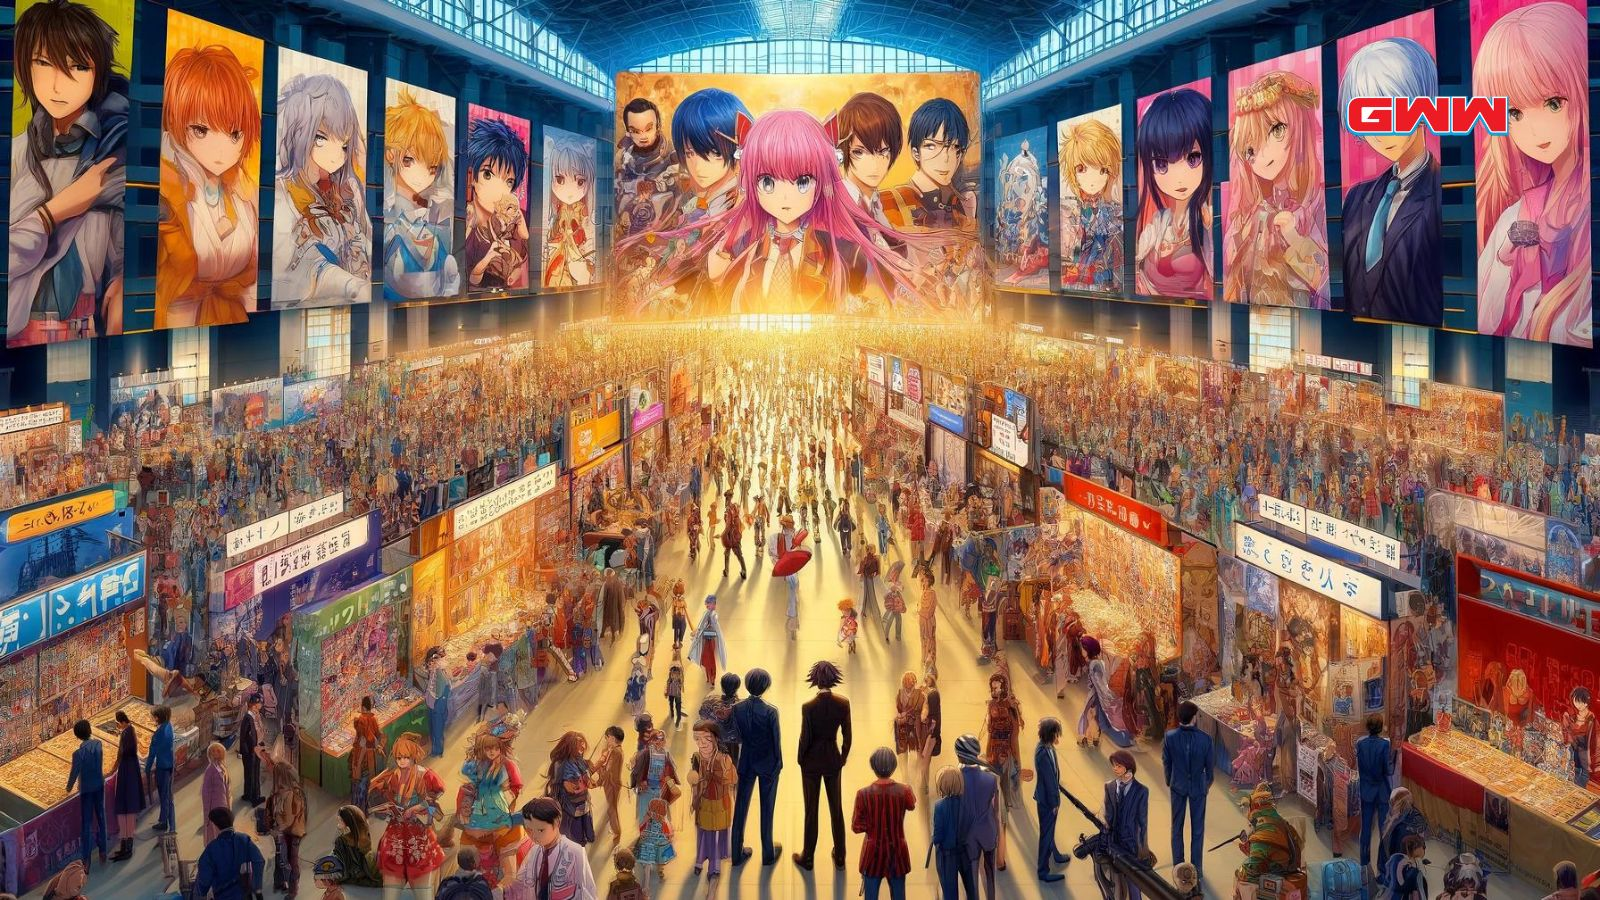 Crowded anime convention illustrating fan demographics